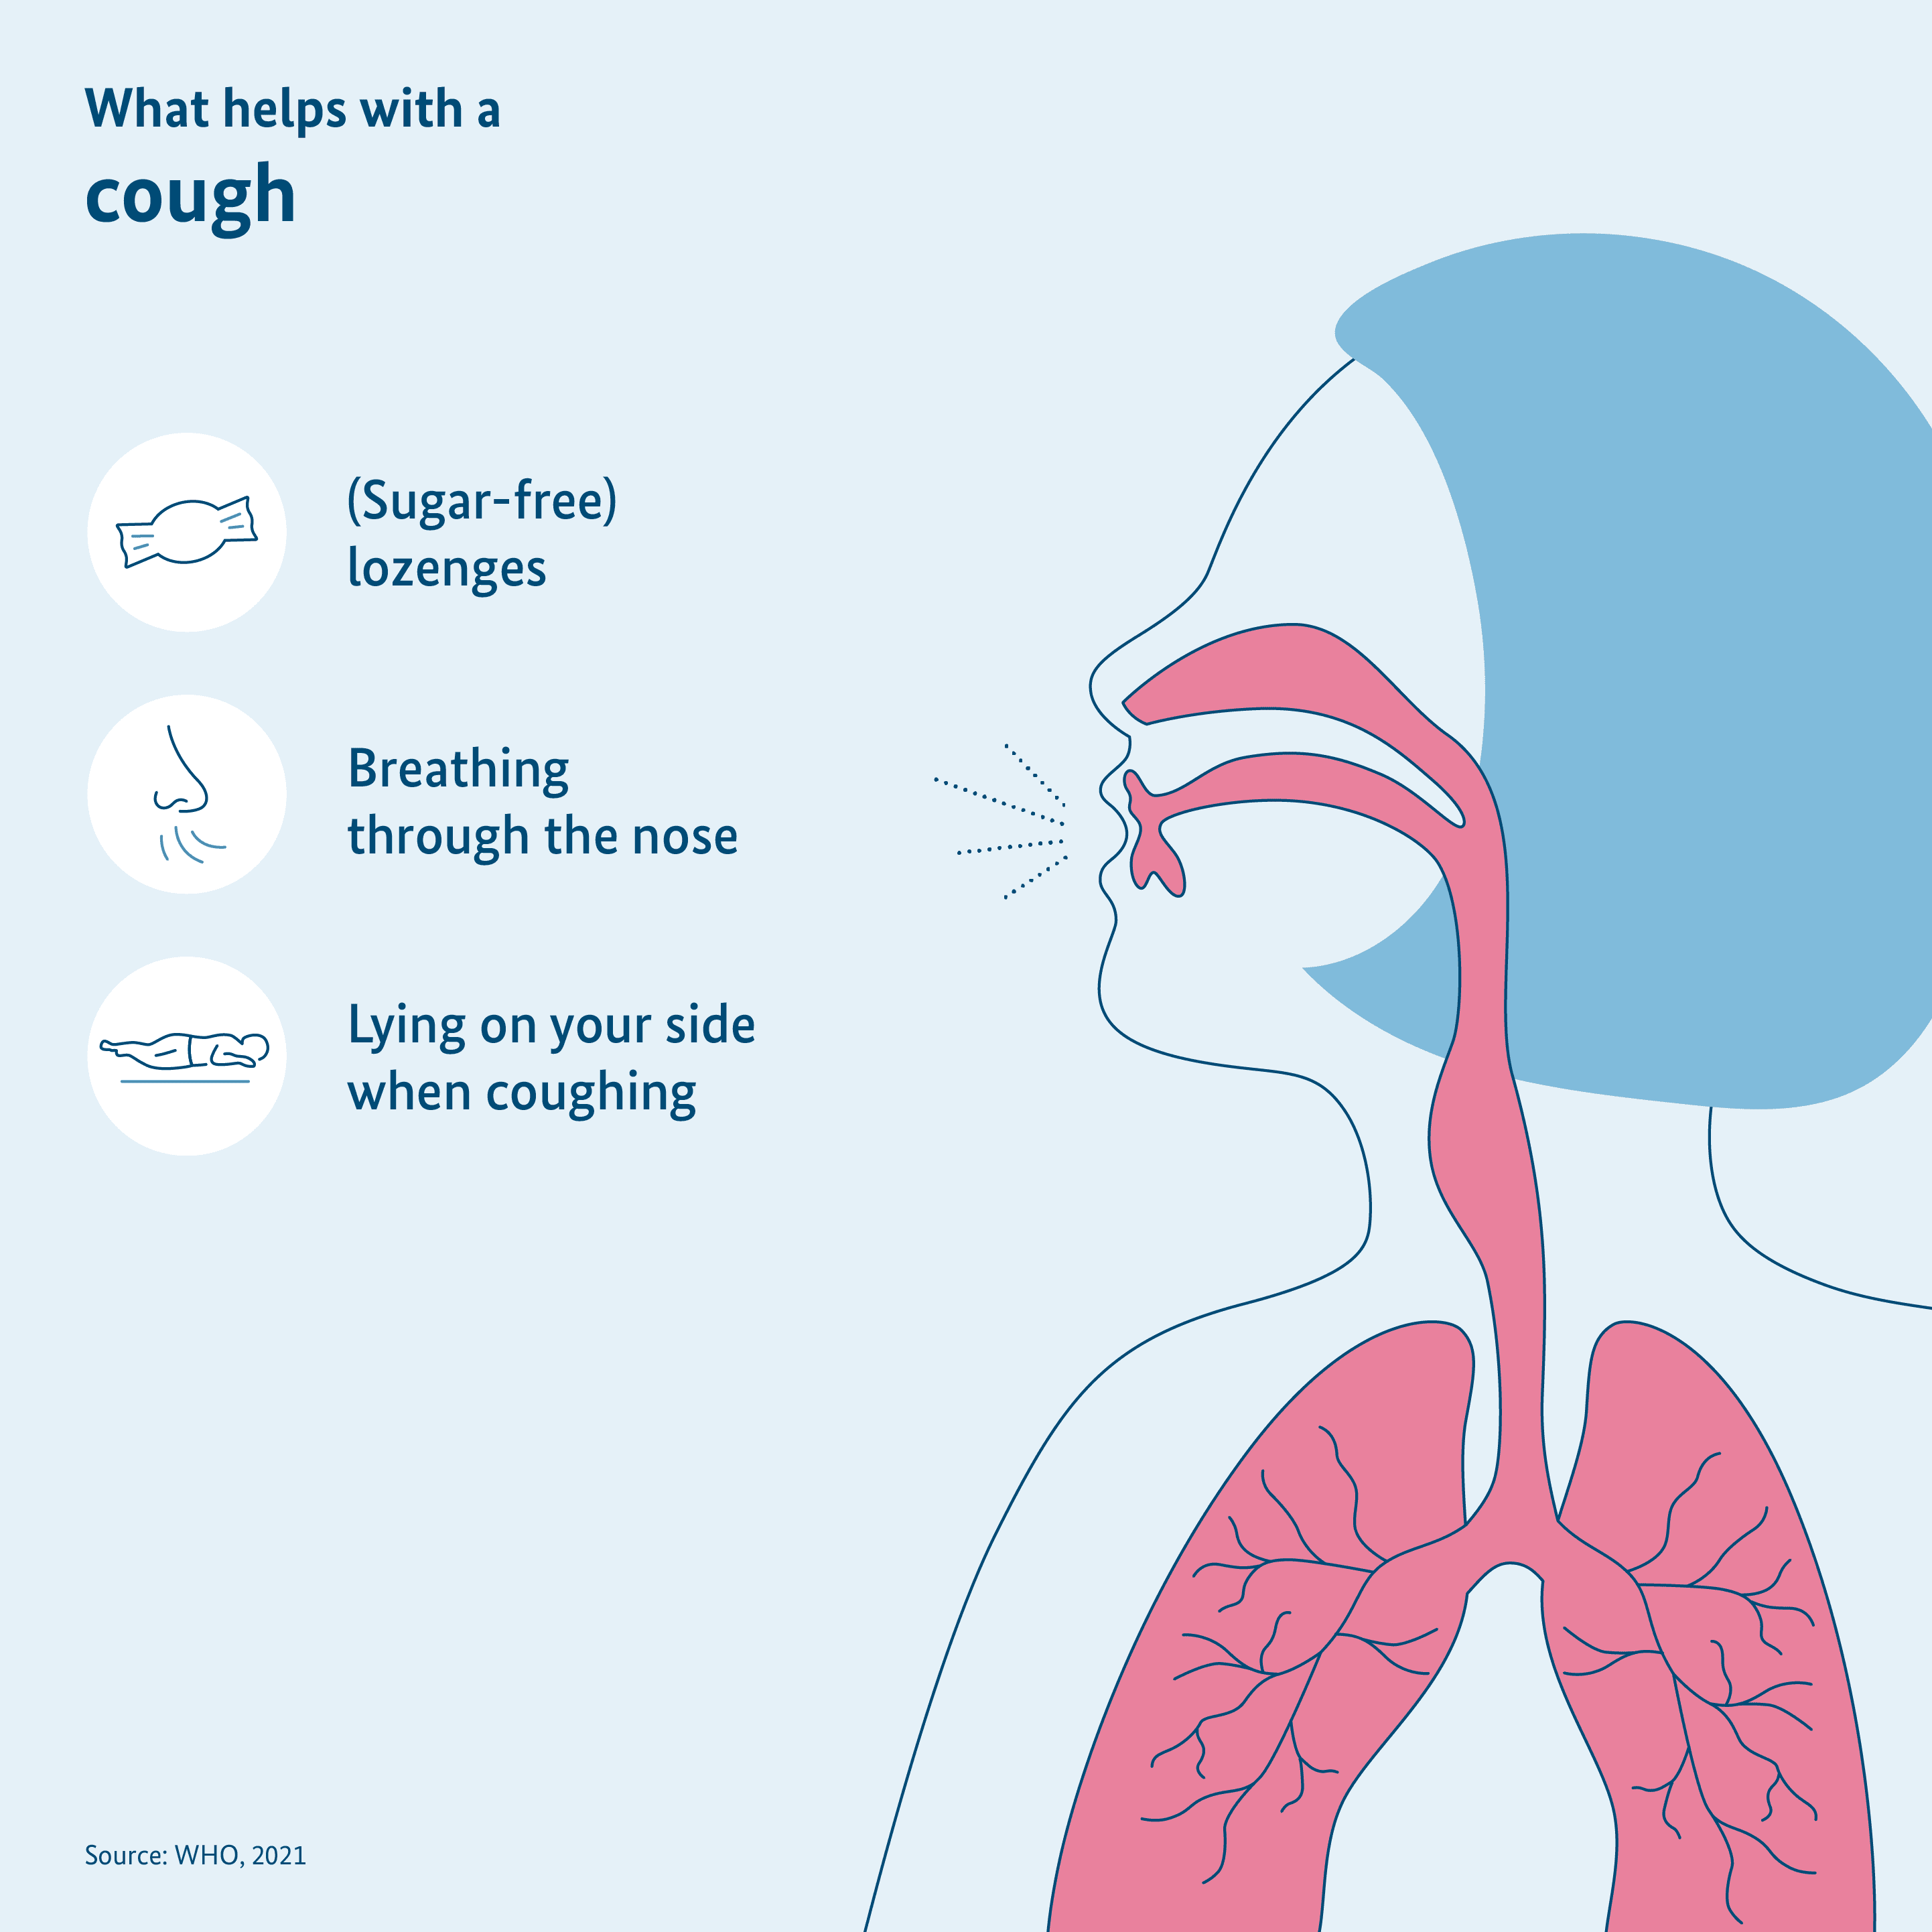 Graphic: Tips on how to deal with cough, human body is shown in cross section with respiratory tract